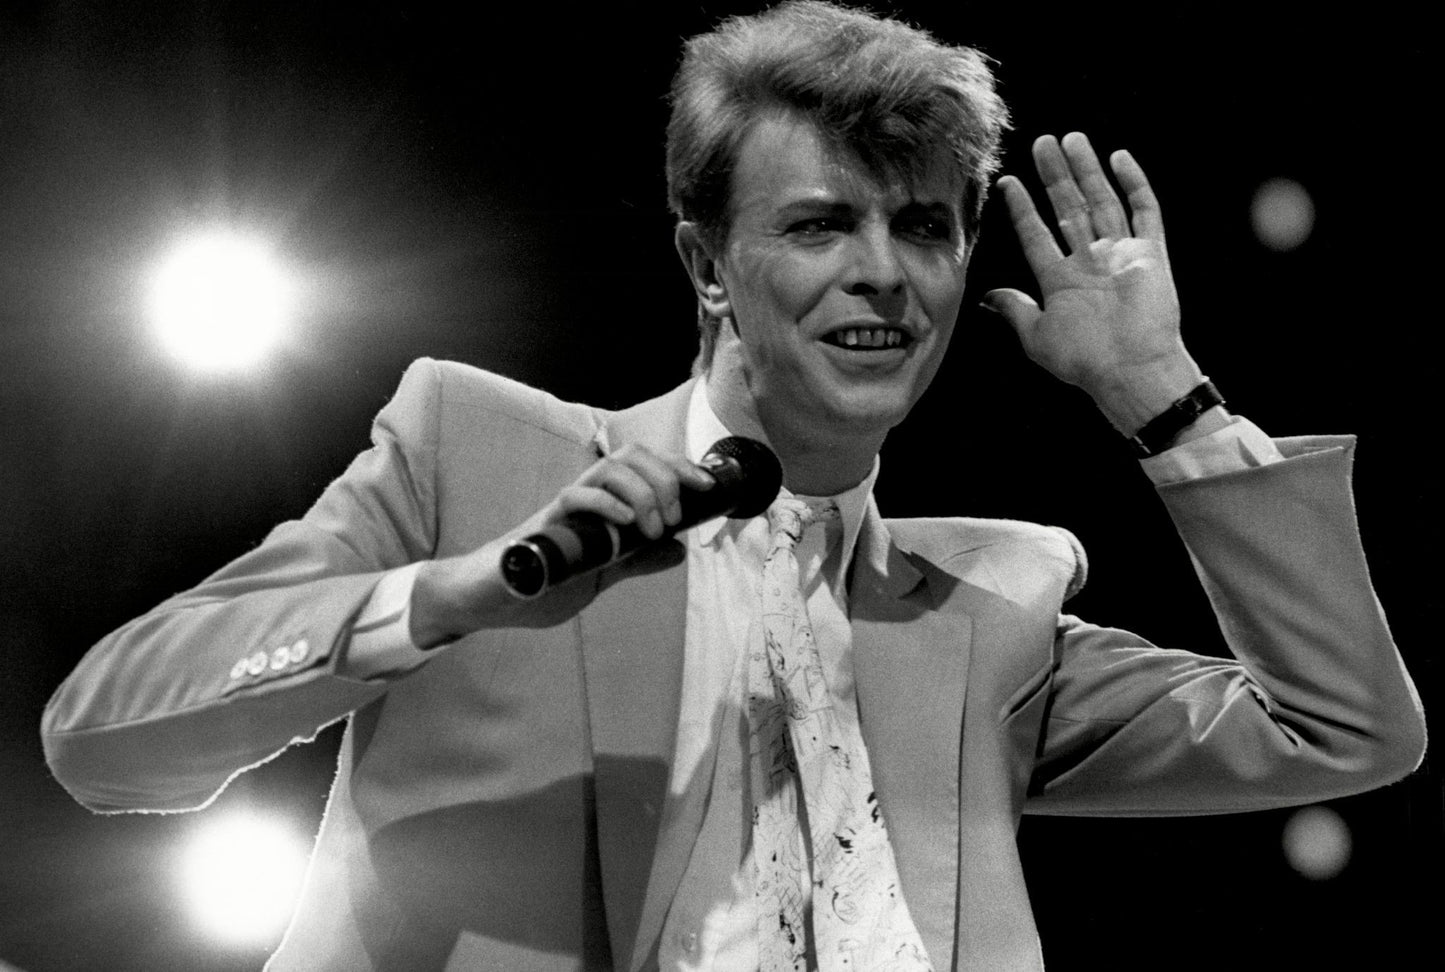 David Bowie - On Stage at Wembley Stadium, England, 1985 Print